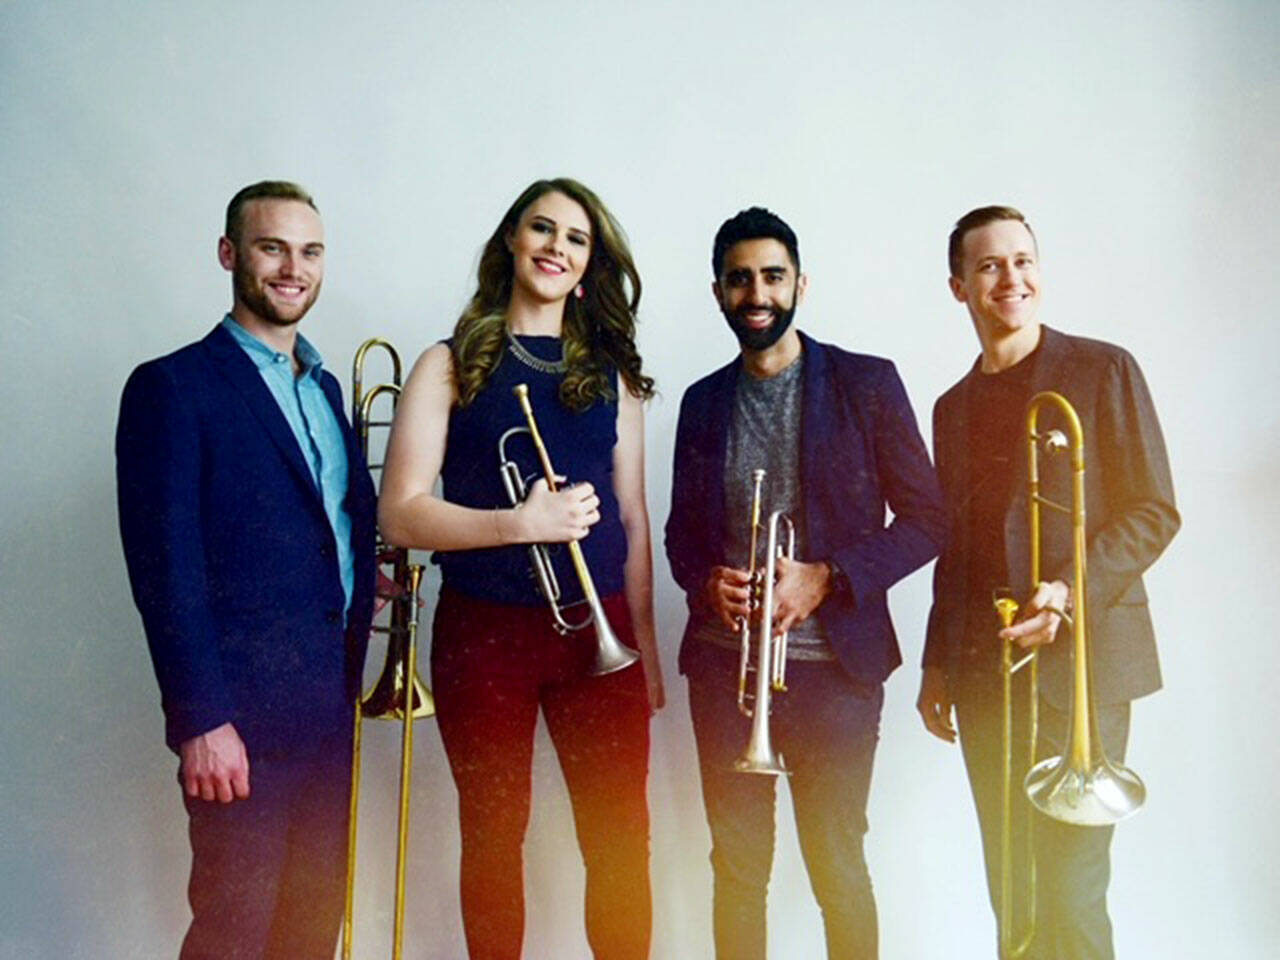 The Westerlies will perform with the Gravitas Quartet on Monday, with Riley Mulherkar and Chloe Rowlands on trumpet, and Andy Clausen and Willem de Koch on trombone.